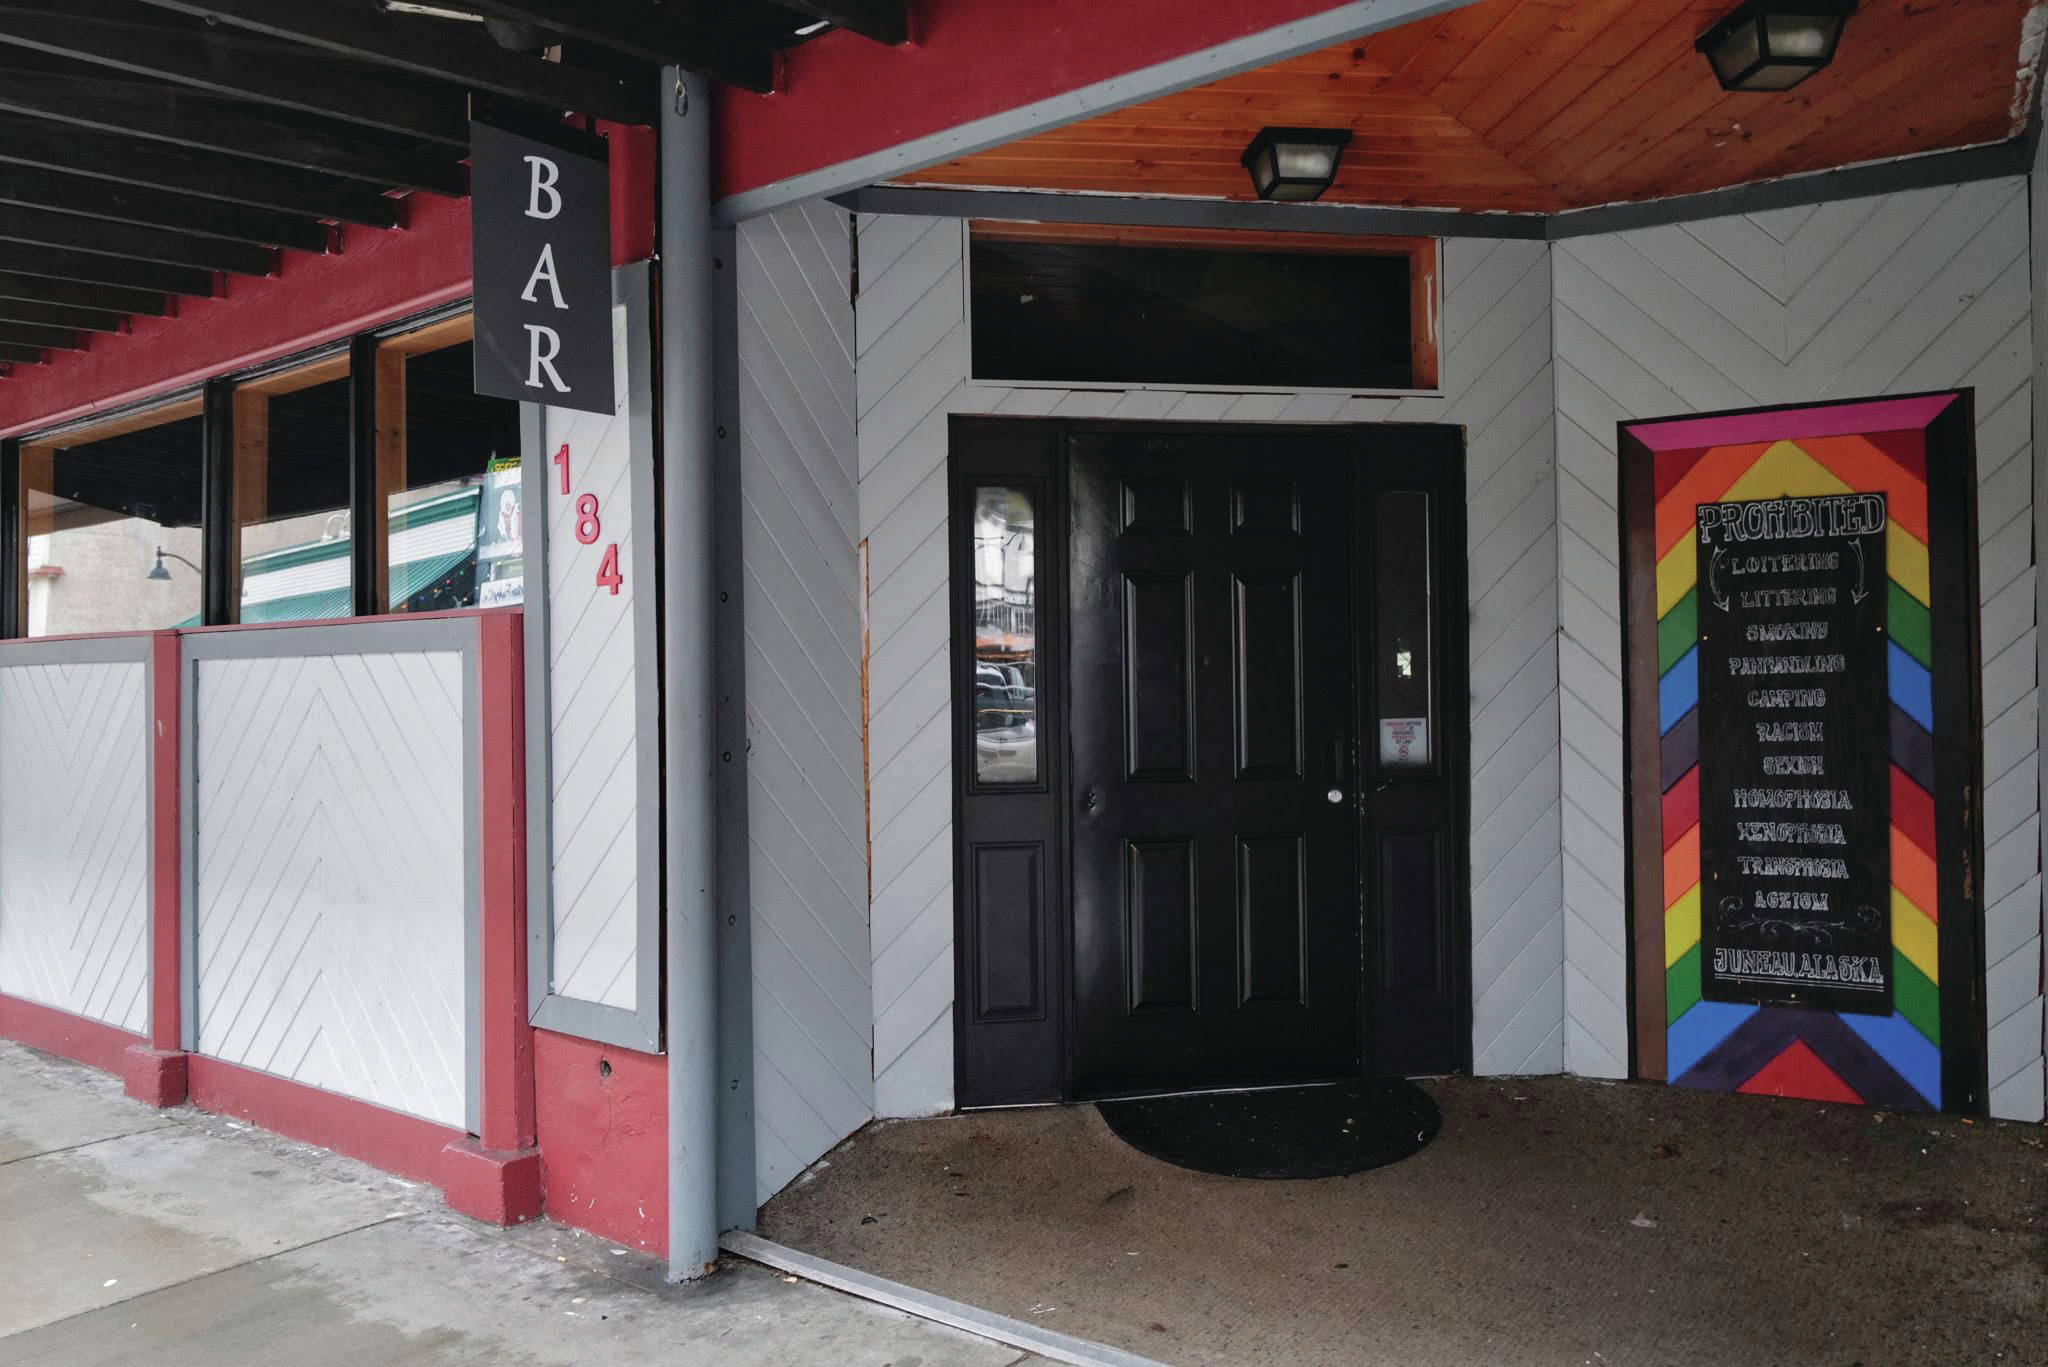 Downtown bar closes for business